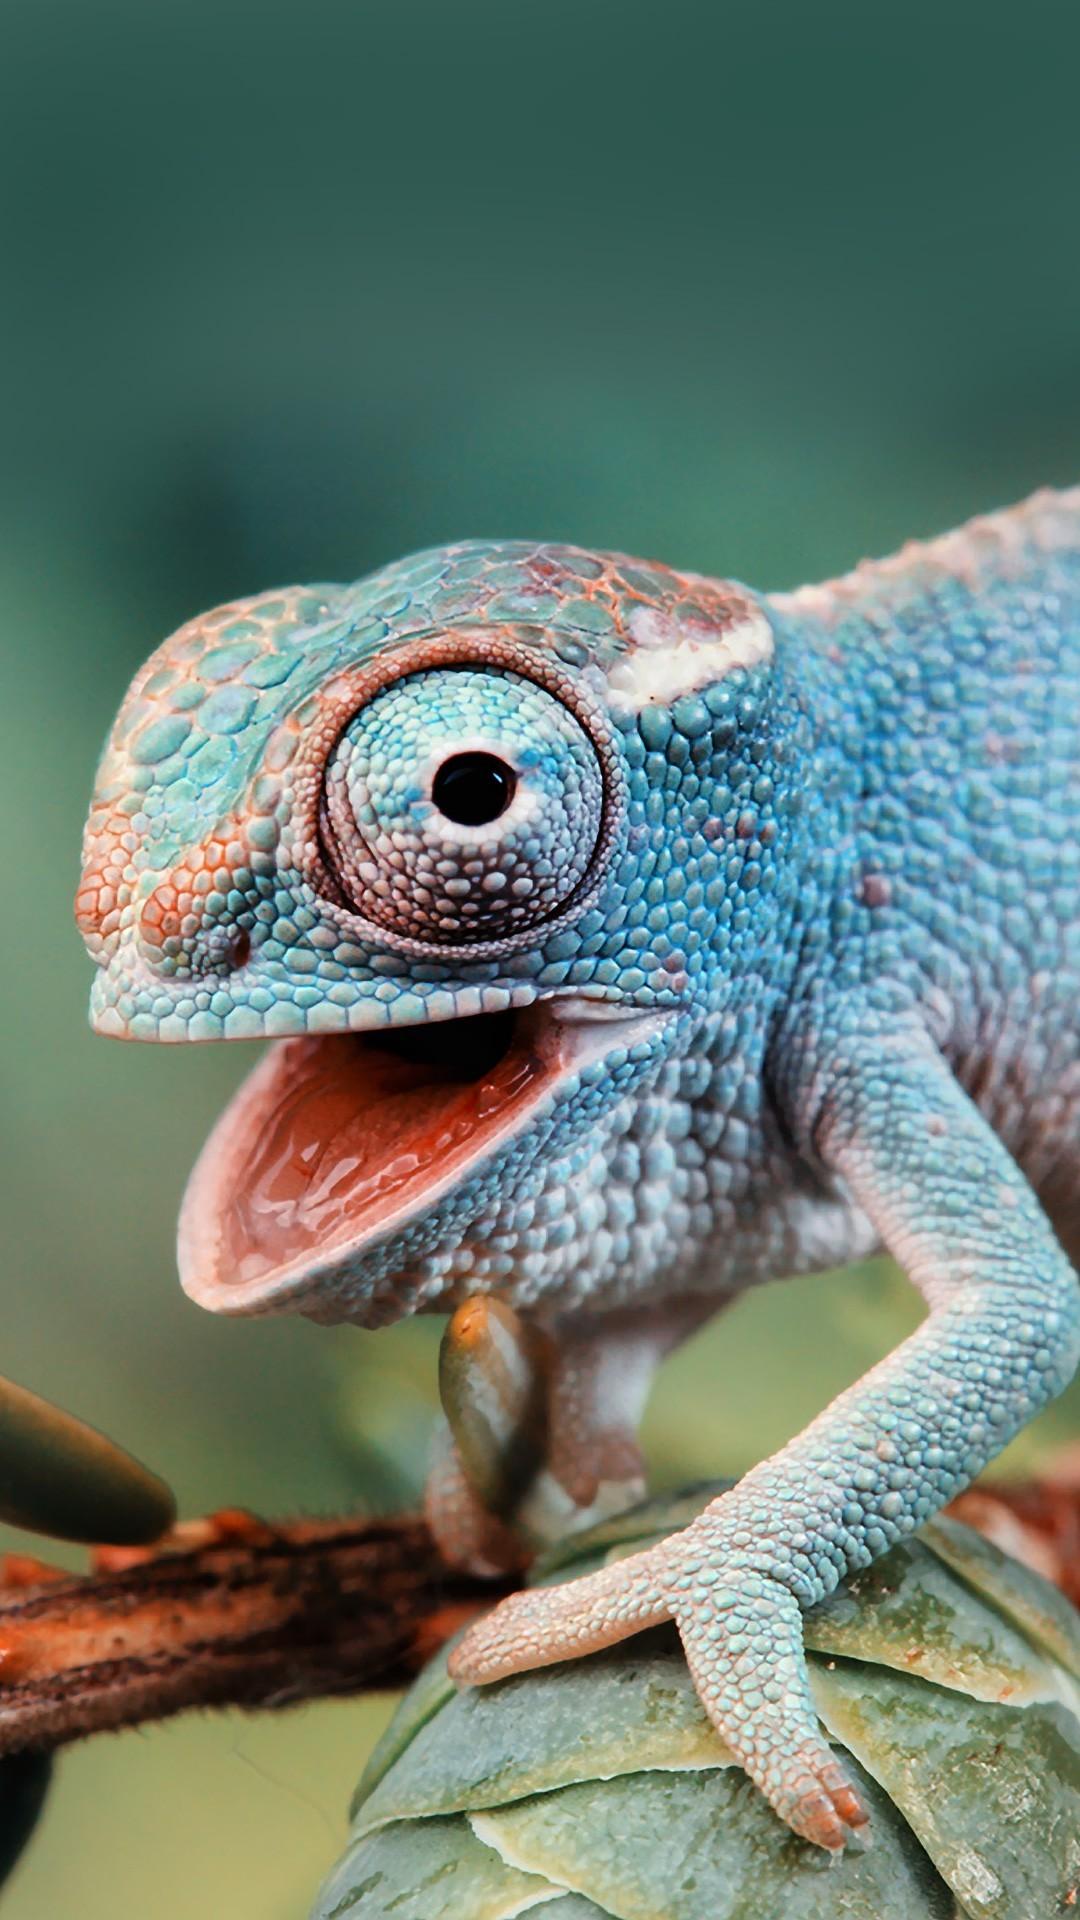 Cute chameleon htc one wallpaper, free and easy to